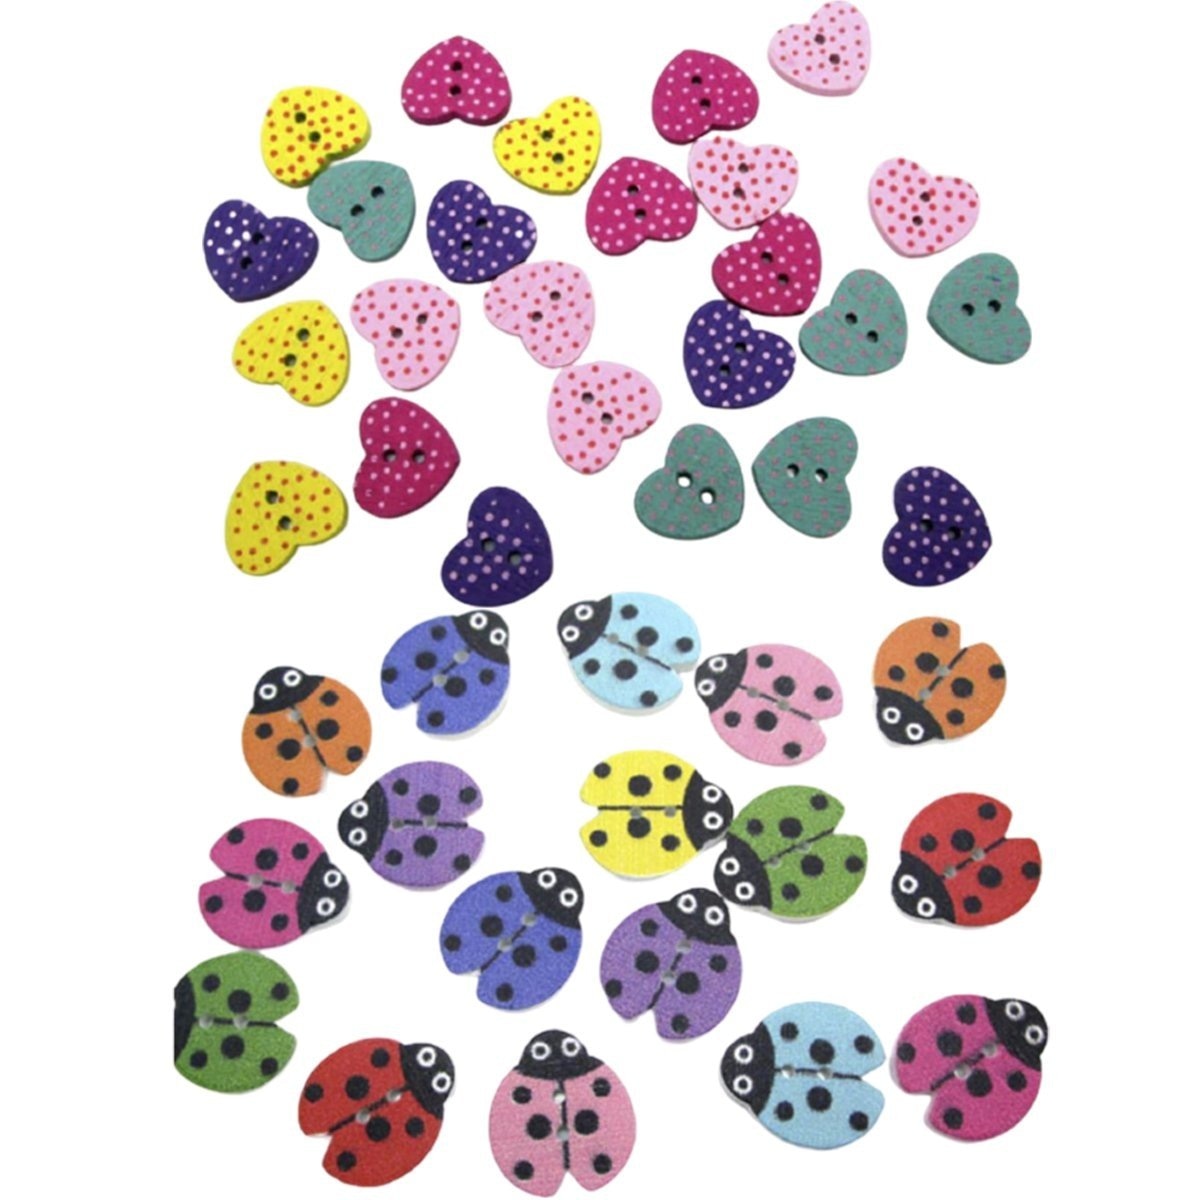 50pcs Mixed Ladybug Heart Wood Buttons Sewing Buttons For Kids Clothes DIY